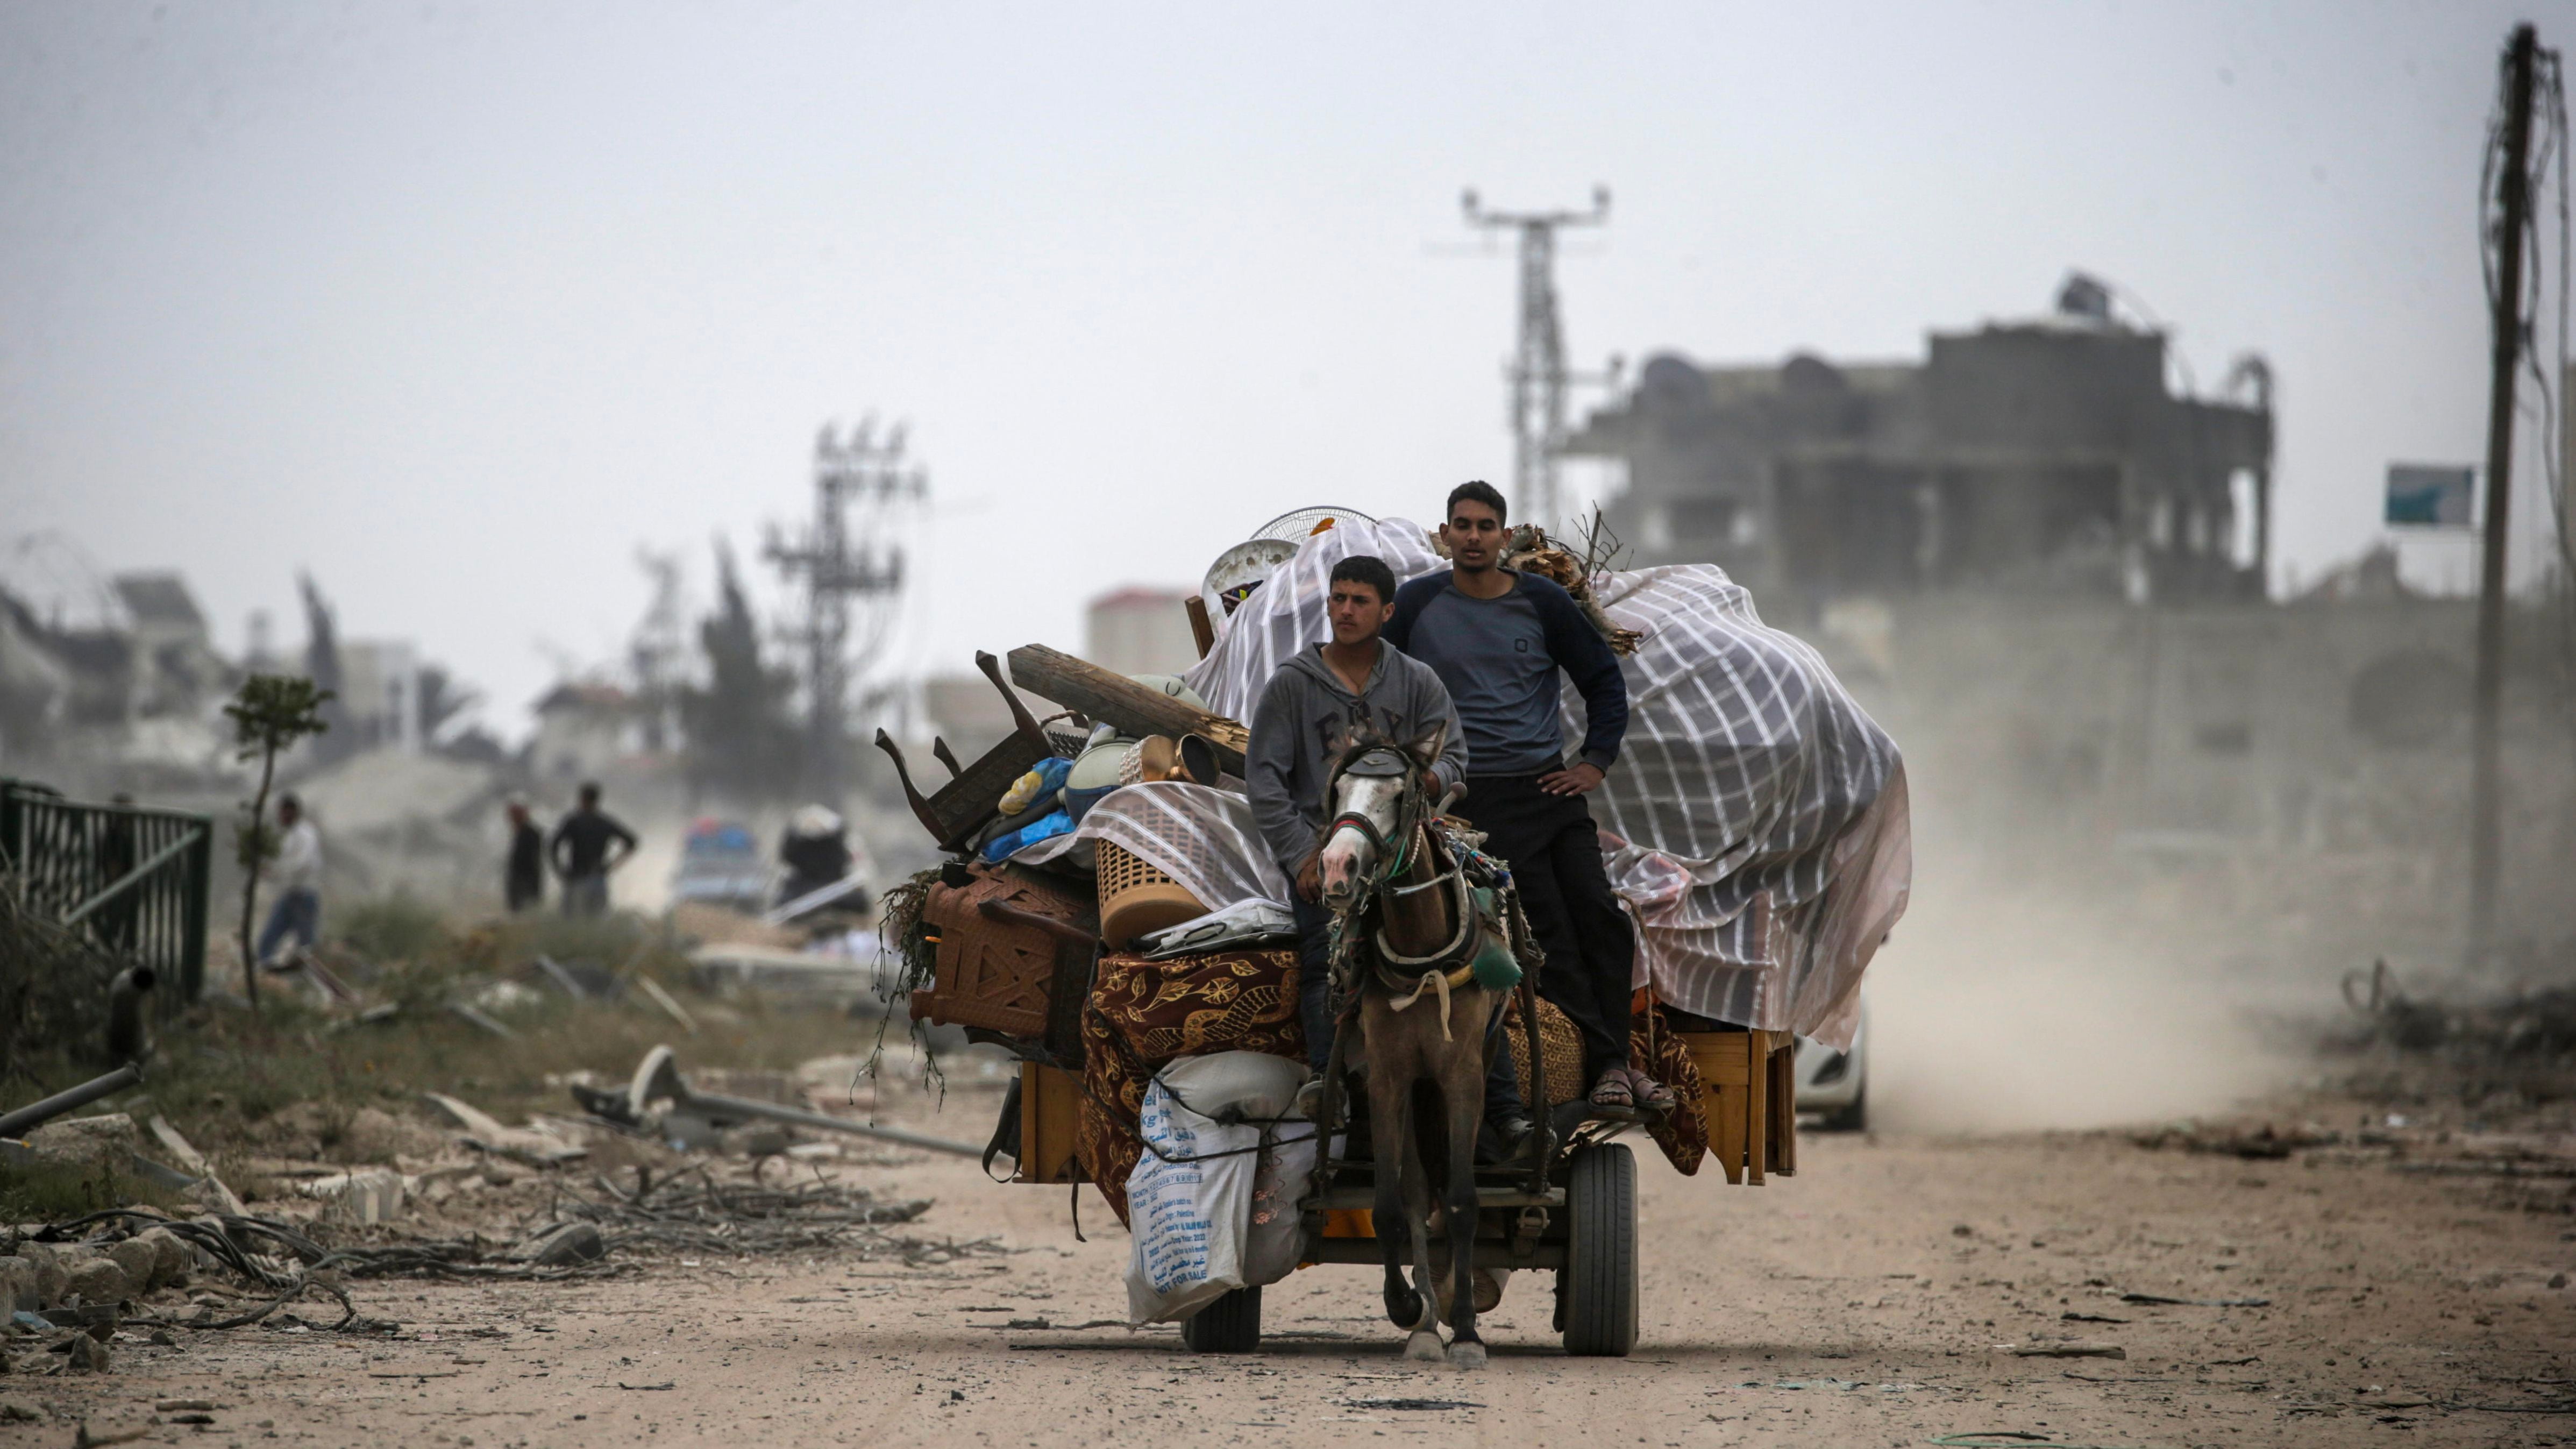 Khan Younis (---), 08/04/2024.- Palestinians ride on a cart loaded with their belongings past the rubble of destroyed houses following the Israeli military operation in Khan Younis, southern Gaza Strip, 08 April 2024. Displaced Palestinians have started to return to Khan Younis, after the Israeli army announced on 07 April its partial withdrawal from parts of the southern Gaza Strip. Since 07 October 2023, up to 1.9 million people, or more than 85 percent of the population, have been displaced throughout the Gaza Strip, some more than once, according to the United Nations Relief and Works Agency for Palestine Refugees in the Near East (UNRWA), which added that most civilians in Gaza are in 'desperate need of humanitarian assistance and protection'. EFE/EPA/MOHAMMED SABER 